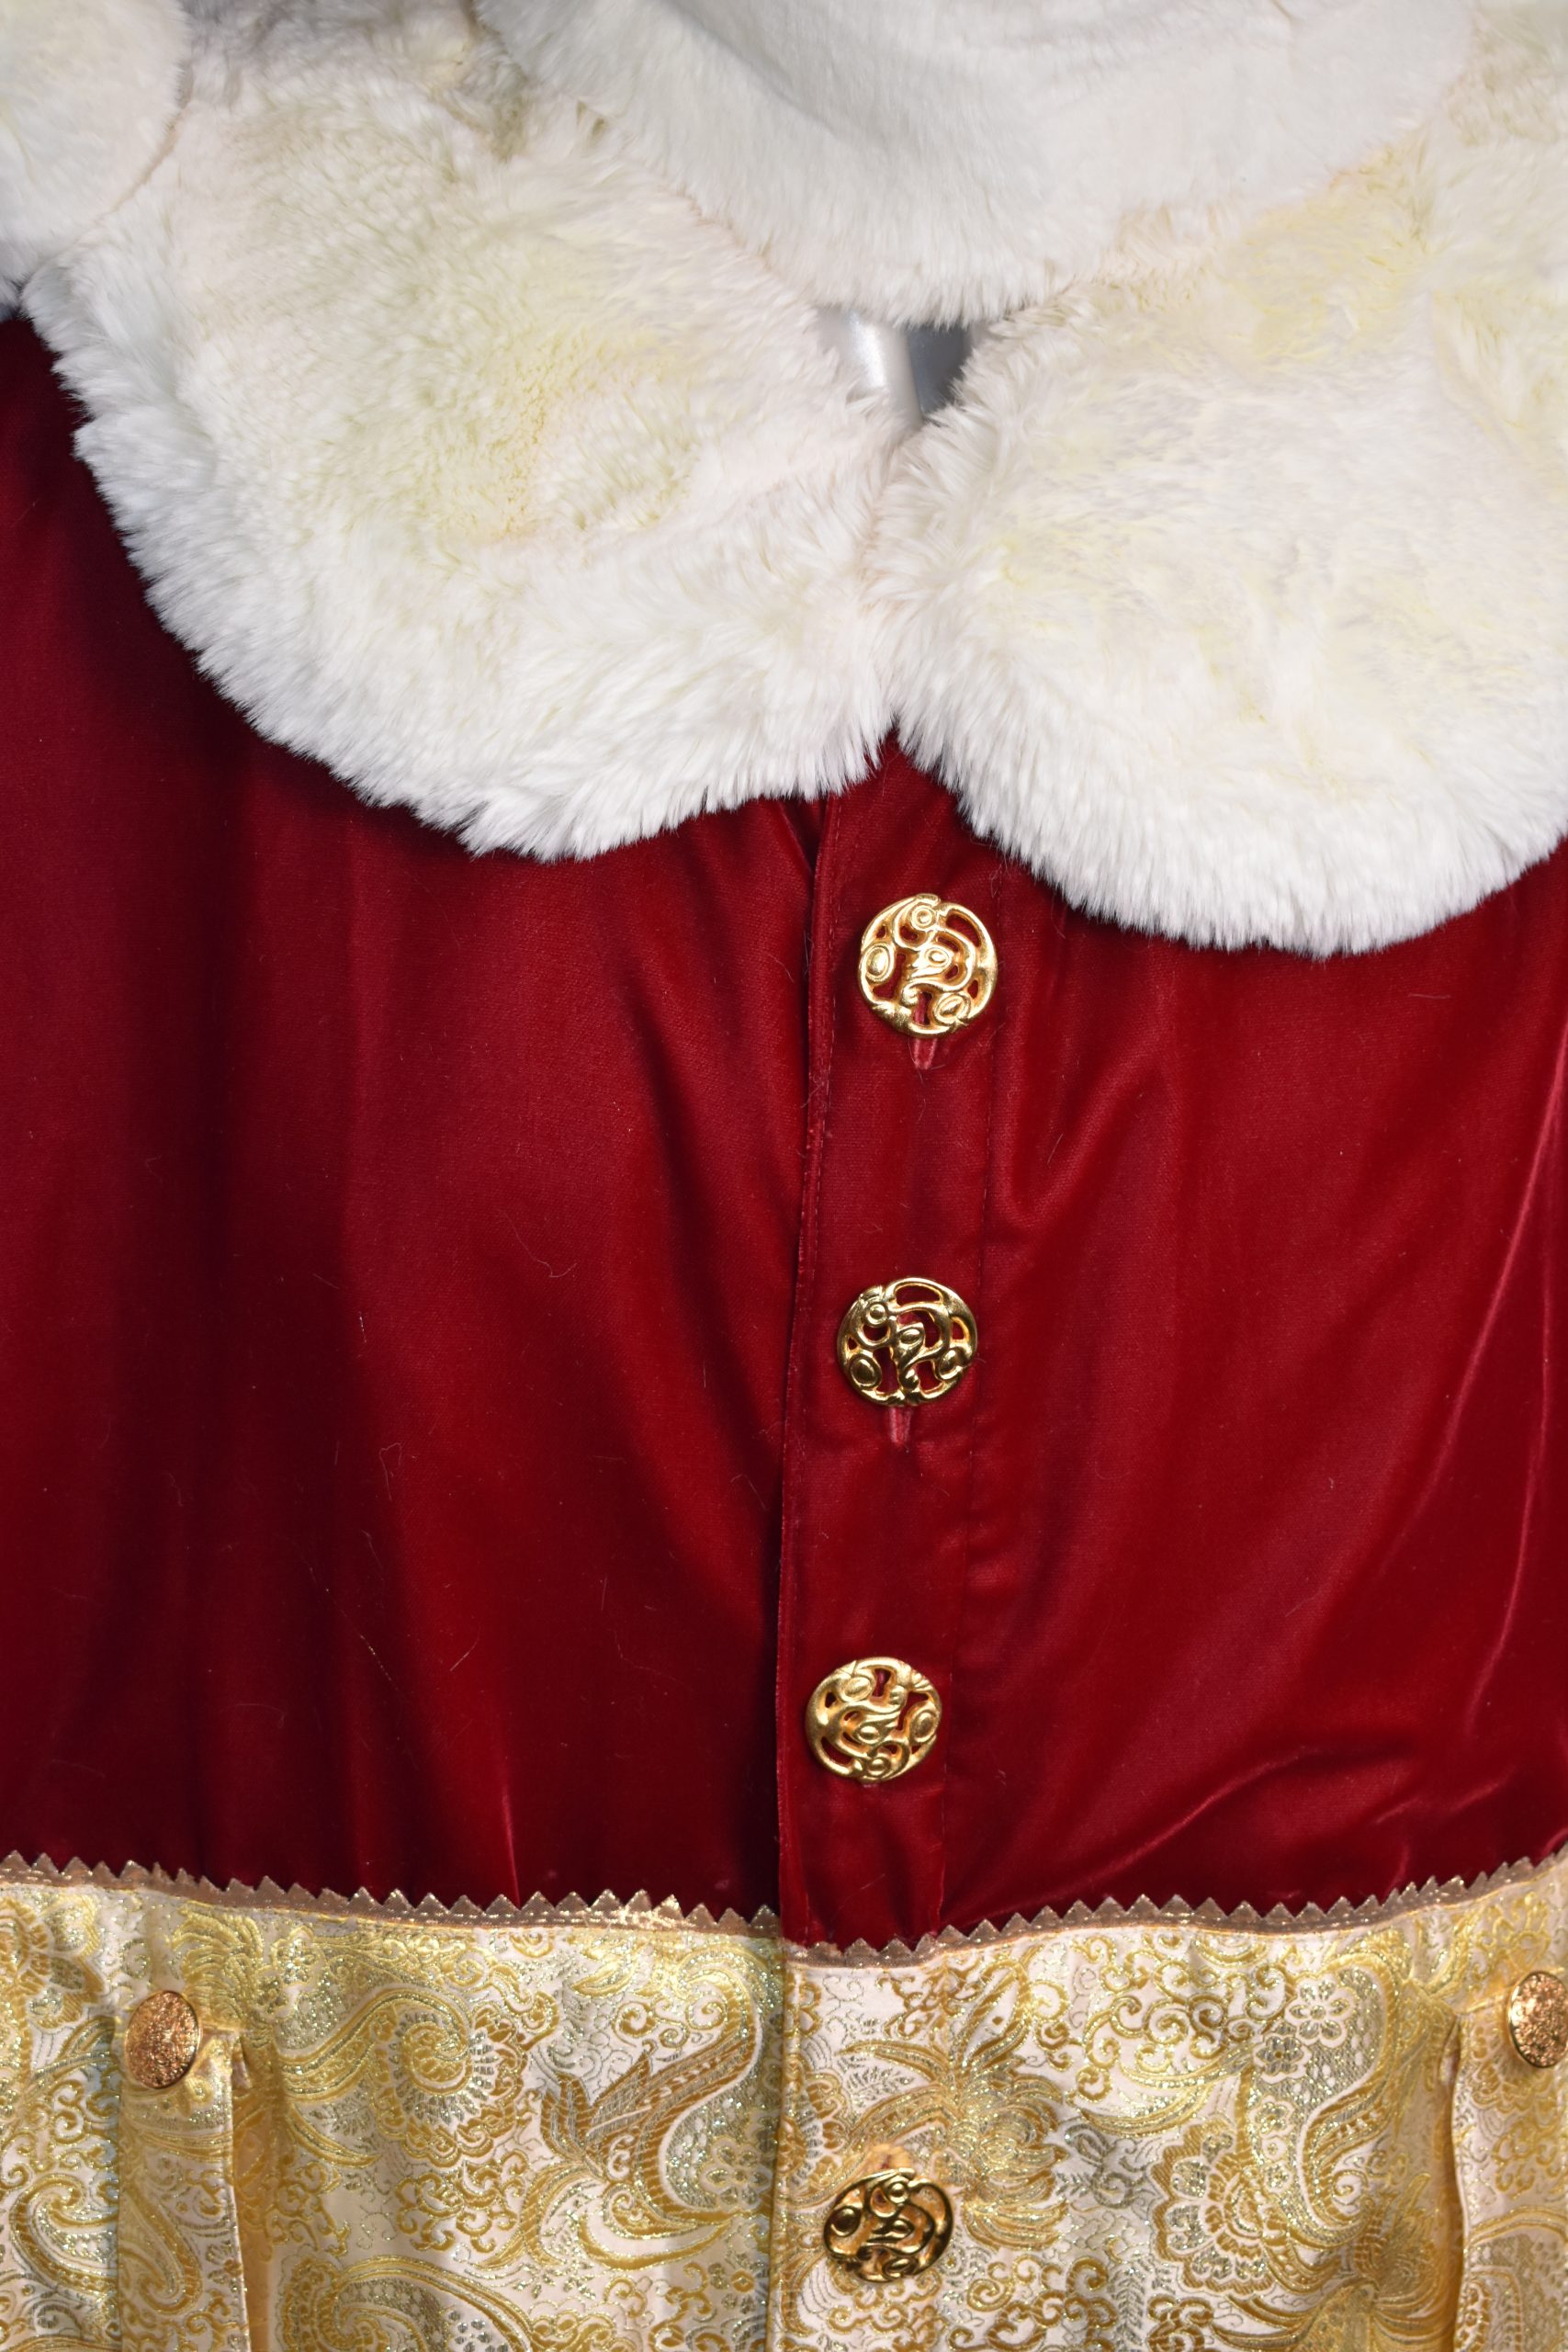 Xmas red velvet suit with a flared front is piped with a gold panel down  the front to highlight the buttons is done in polar bear fur. - Pro Santa  Shop